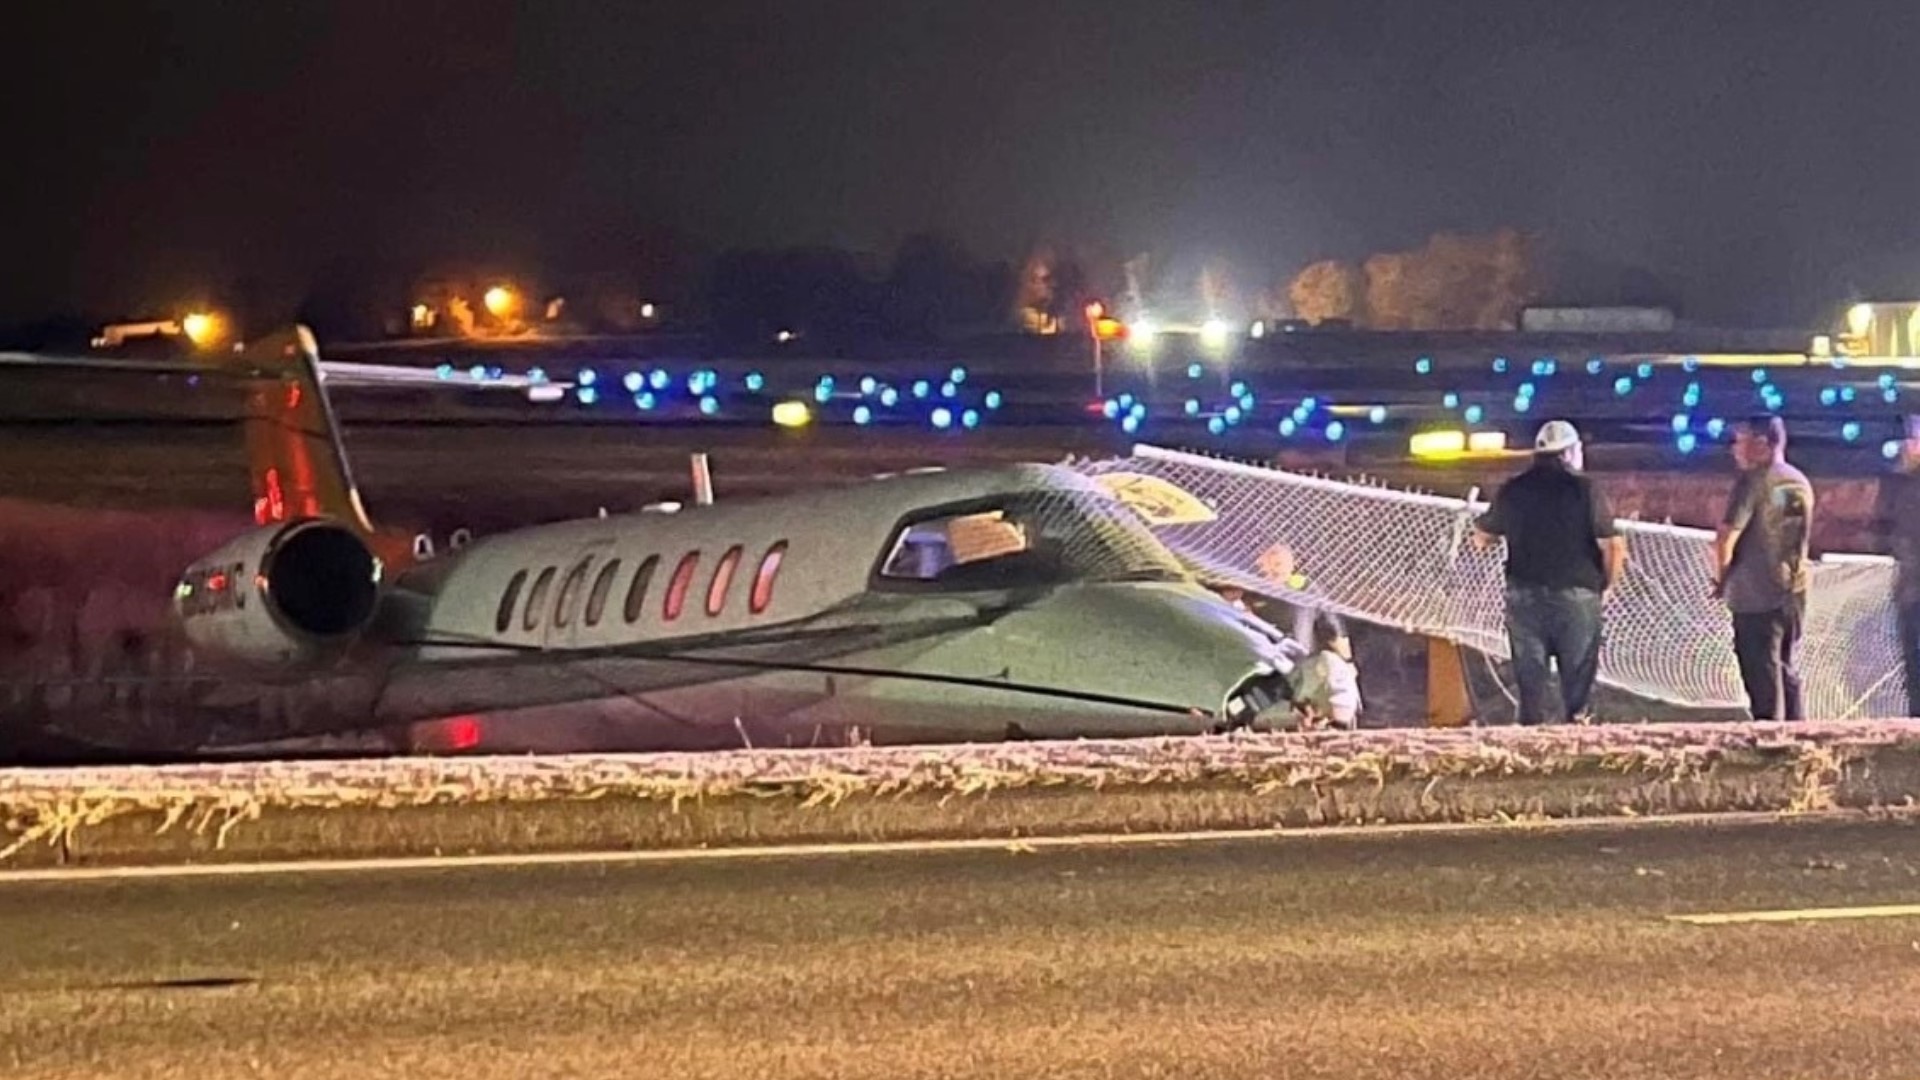 According to the FAA, the jet carrying seven people went off the runway and through a fence after landing in Batesville.